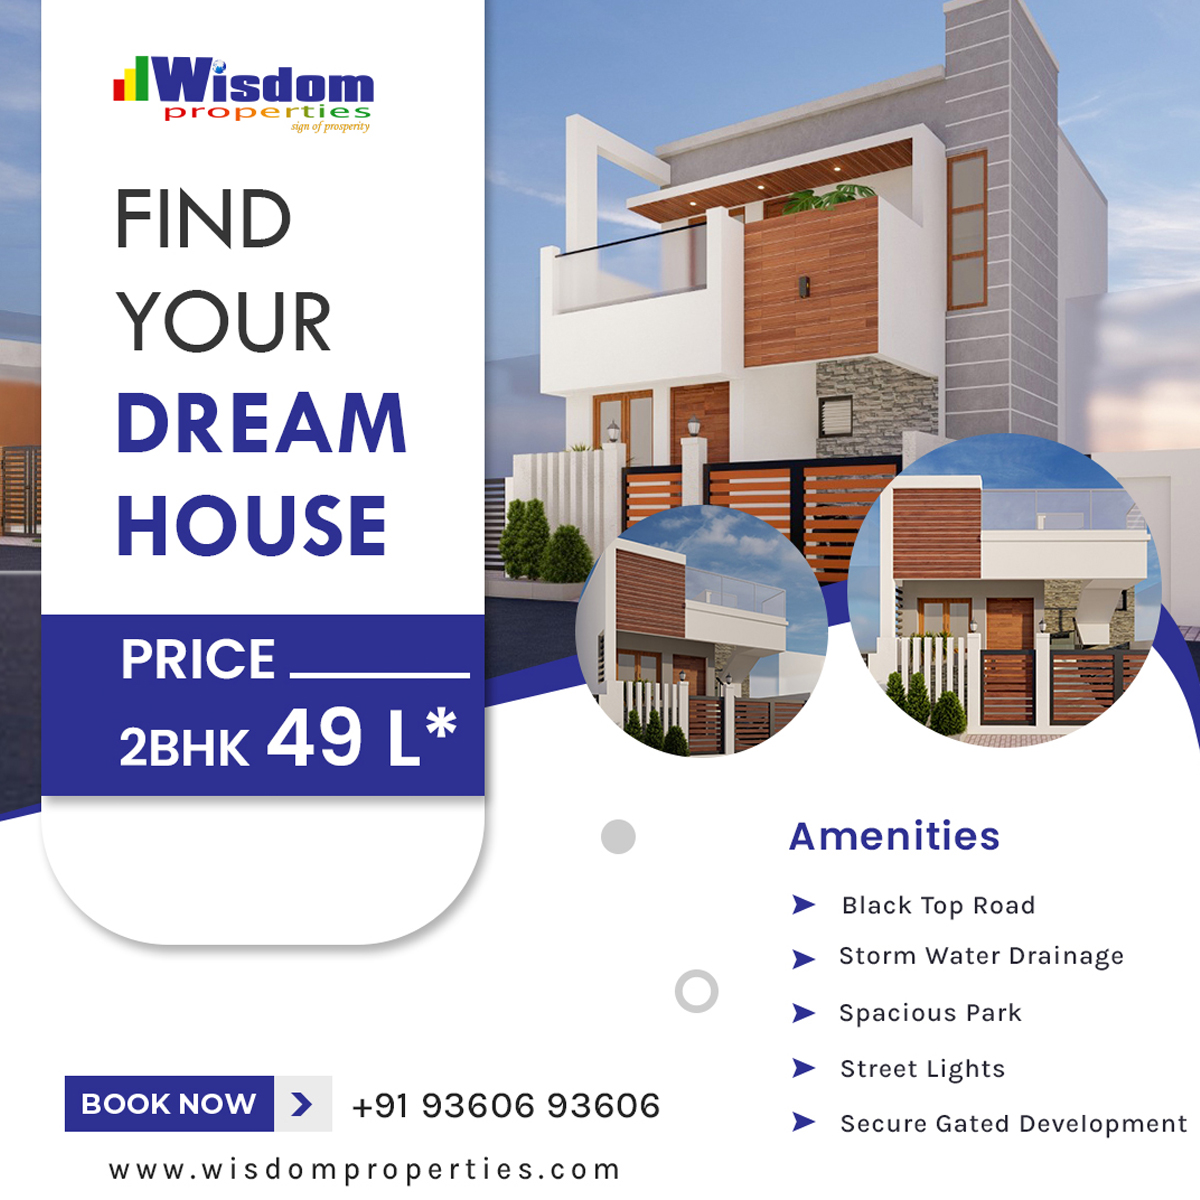 Find your dream house